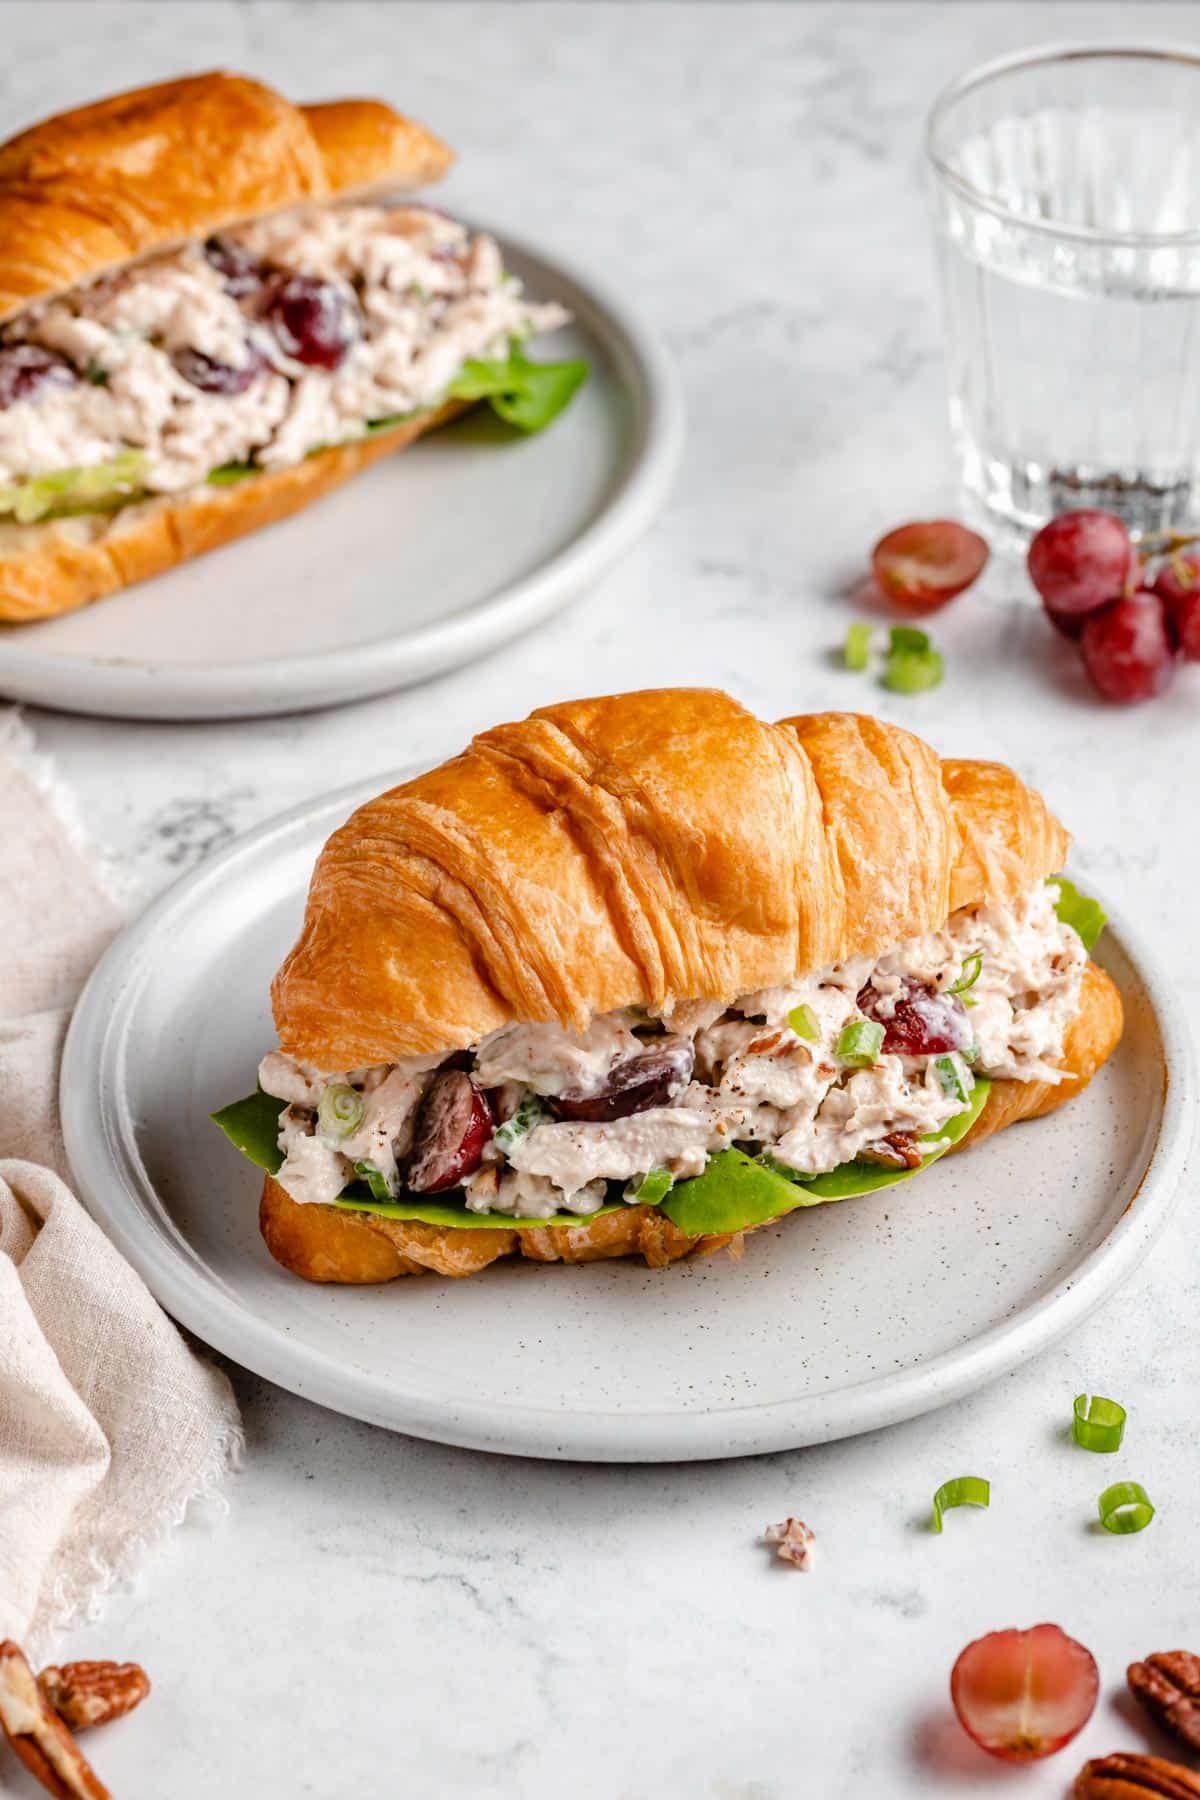 Chicken salad with grapes served on a croissant.